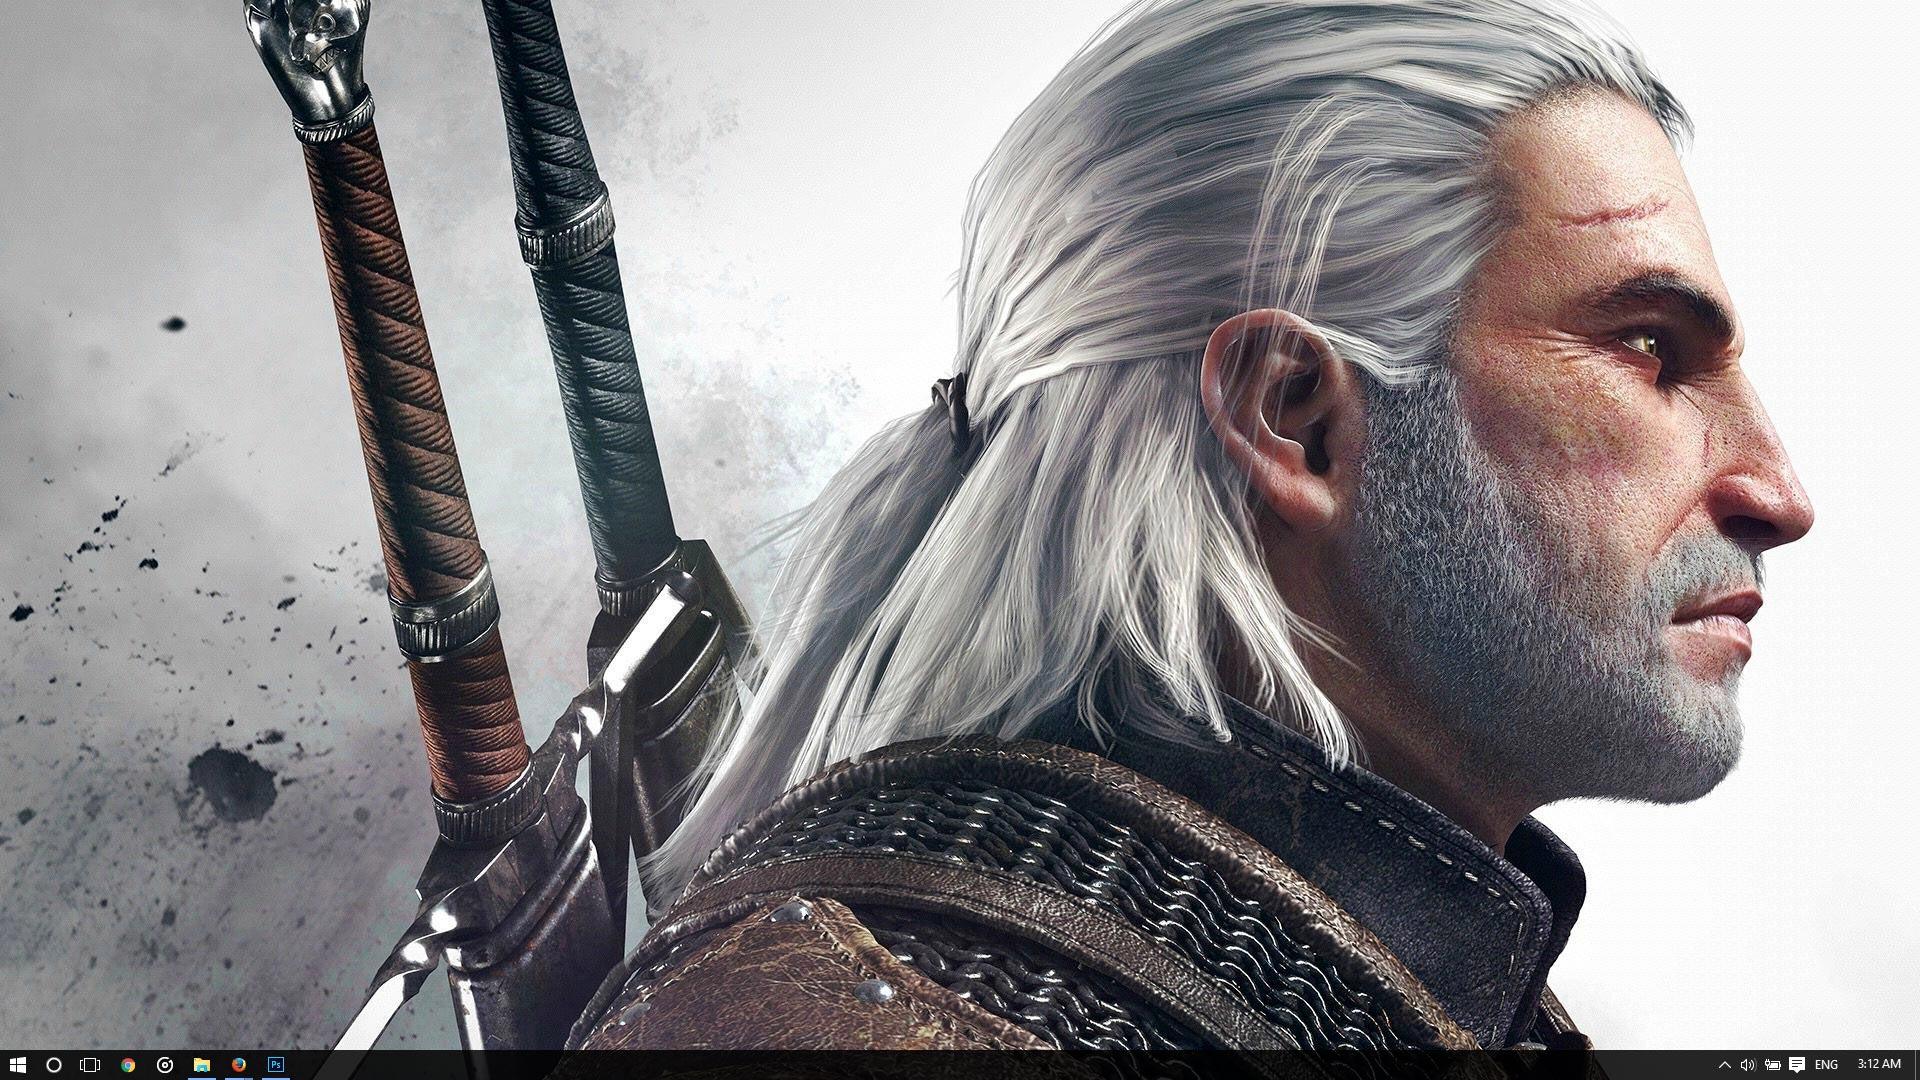 Witcher 3 Theme for Windows 10